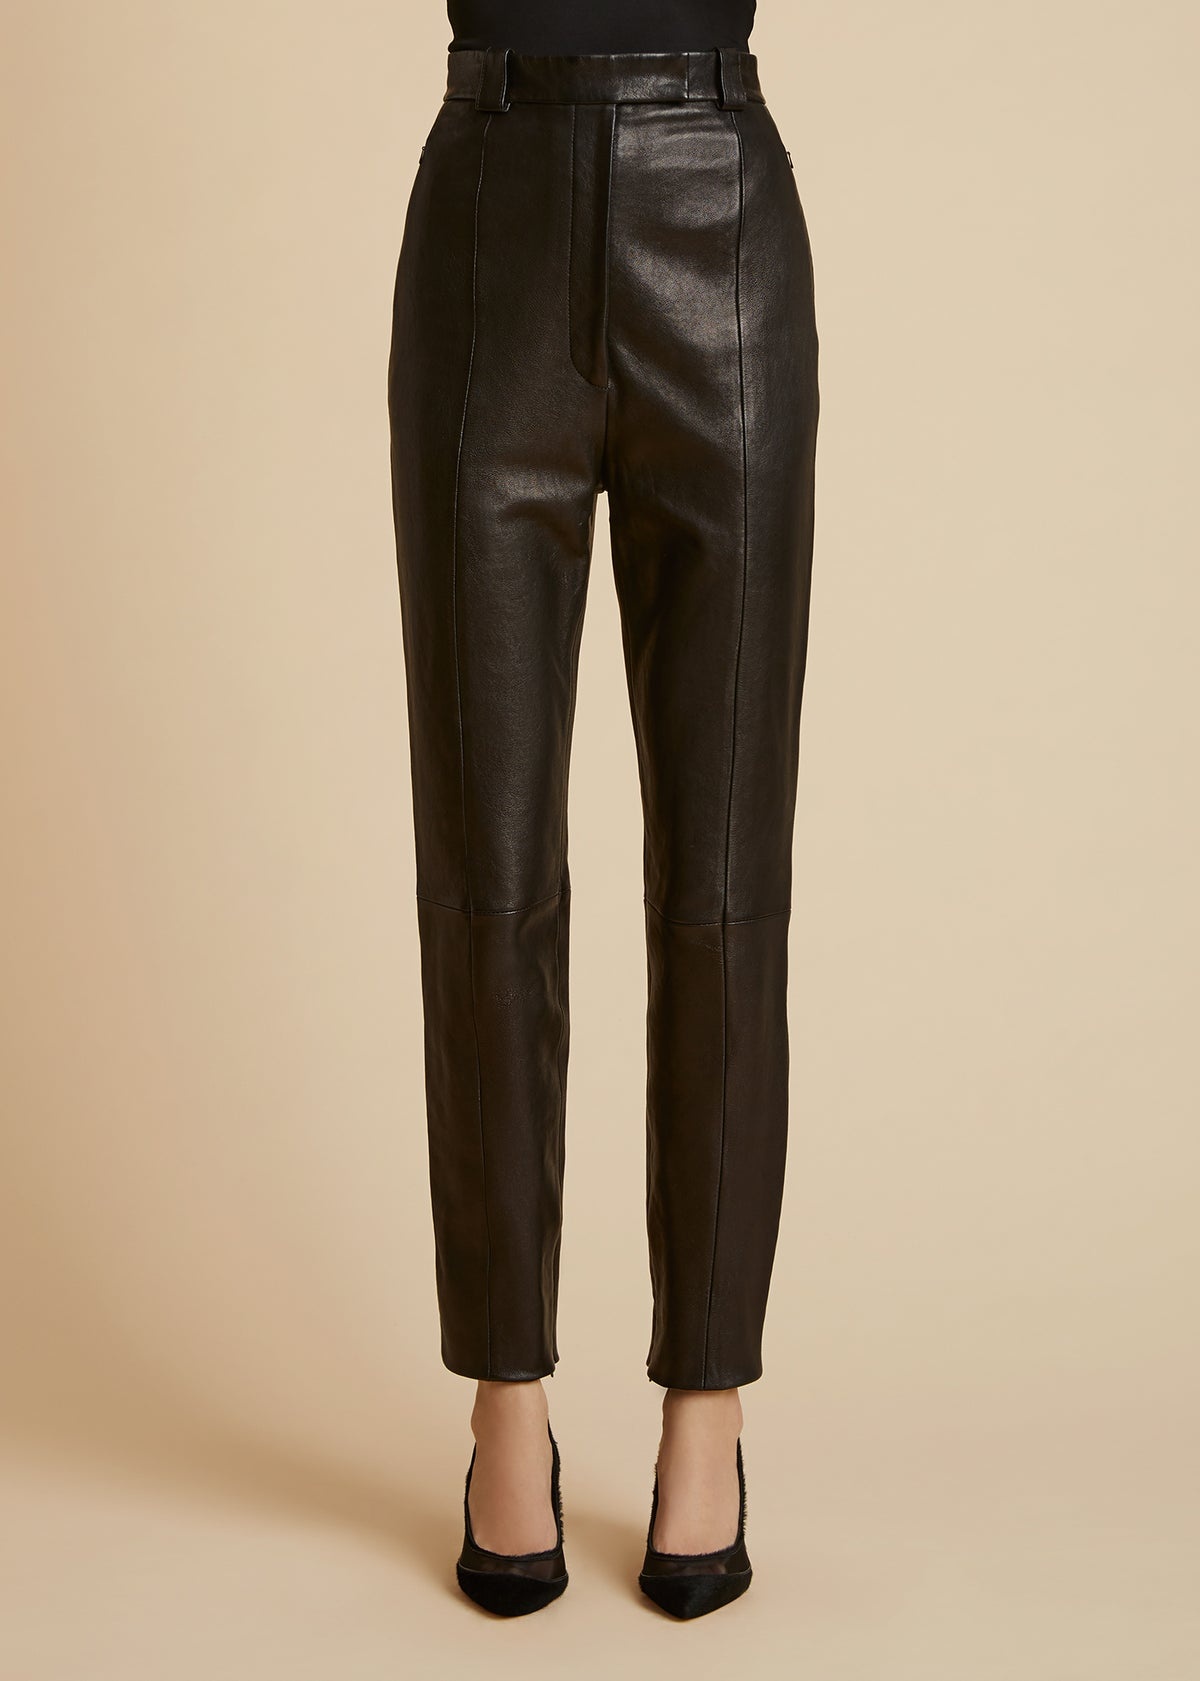 The Waylin Pant in Black Leather - 2